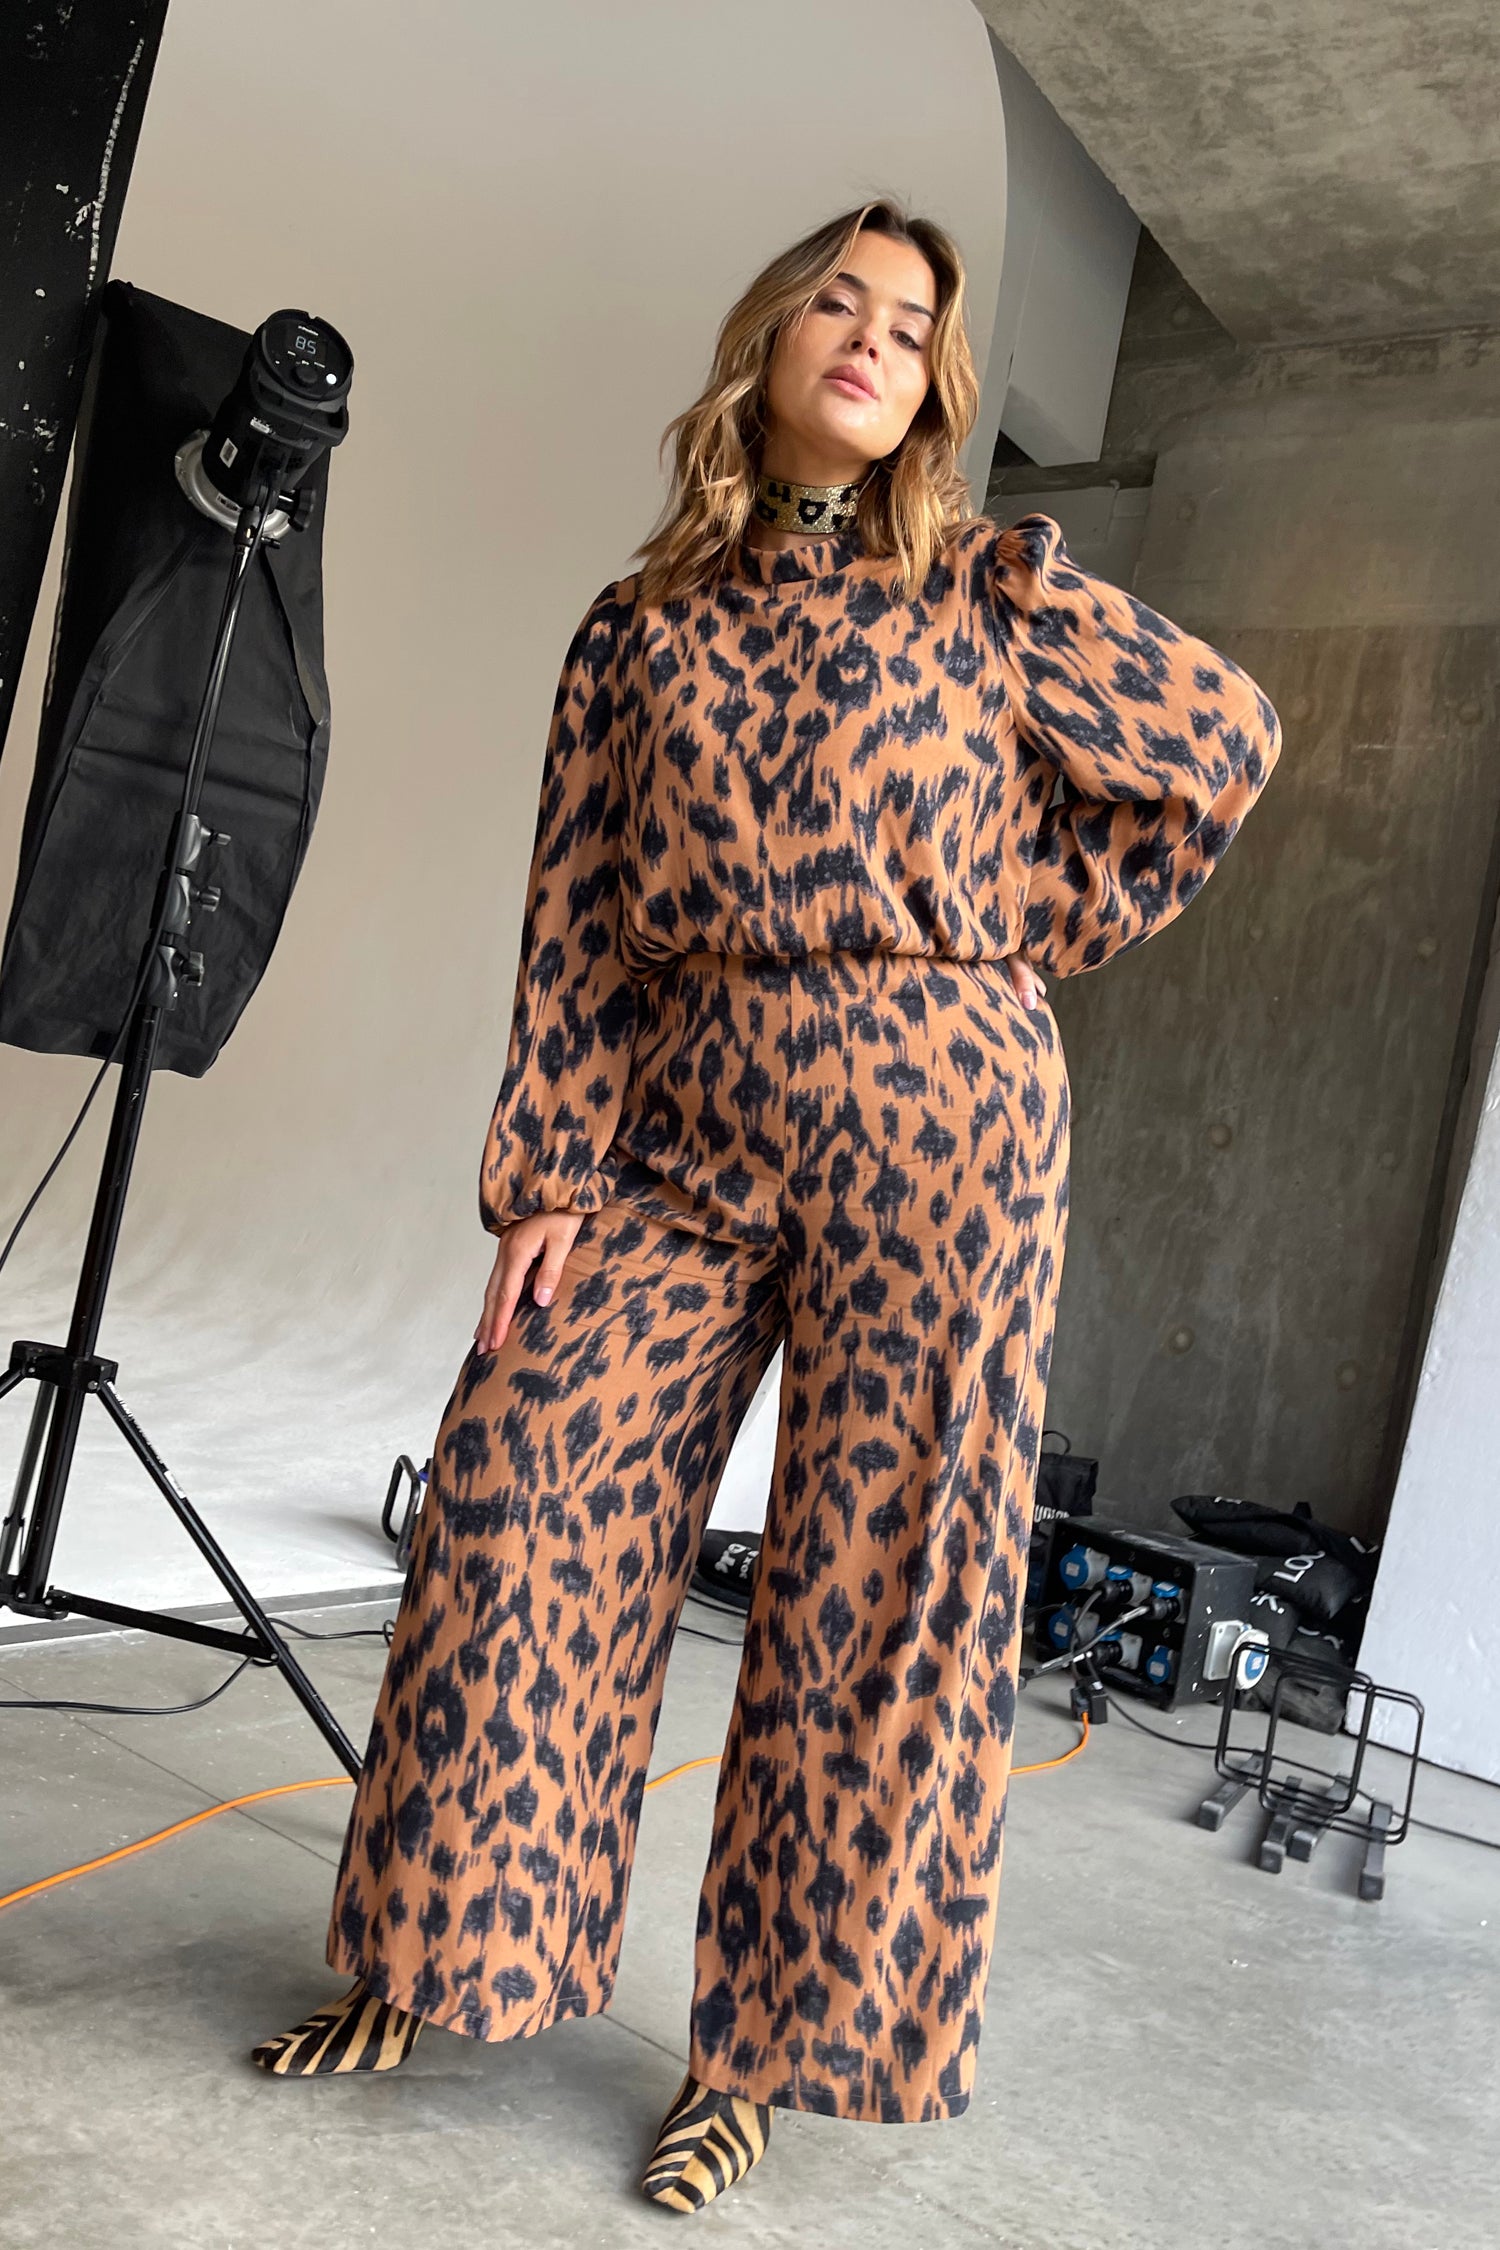 Model wearing Animal Jumpsuit standing facing the camera